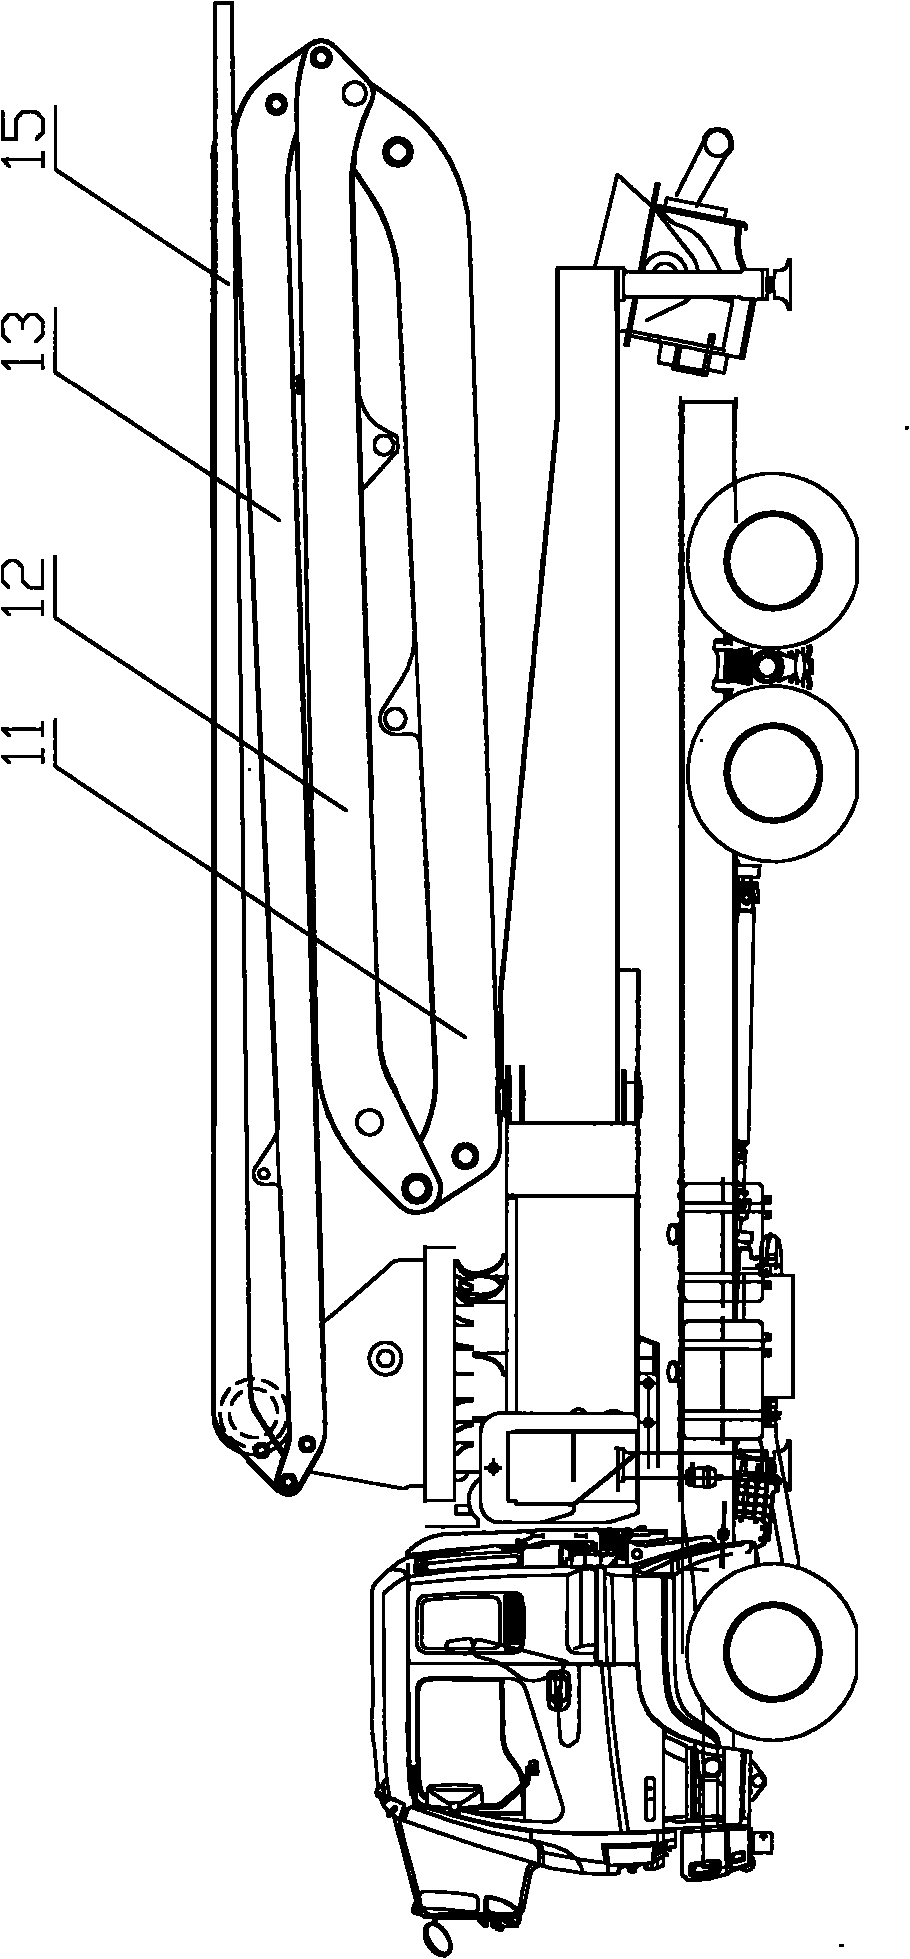 Concrete pump truck and boom device thereof